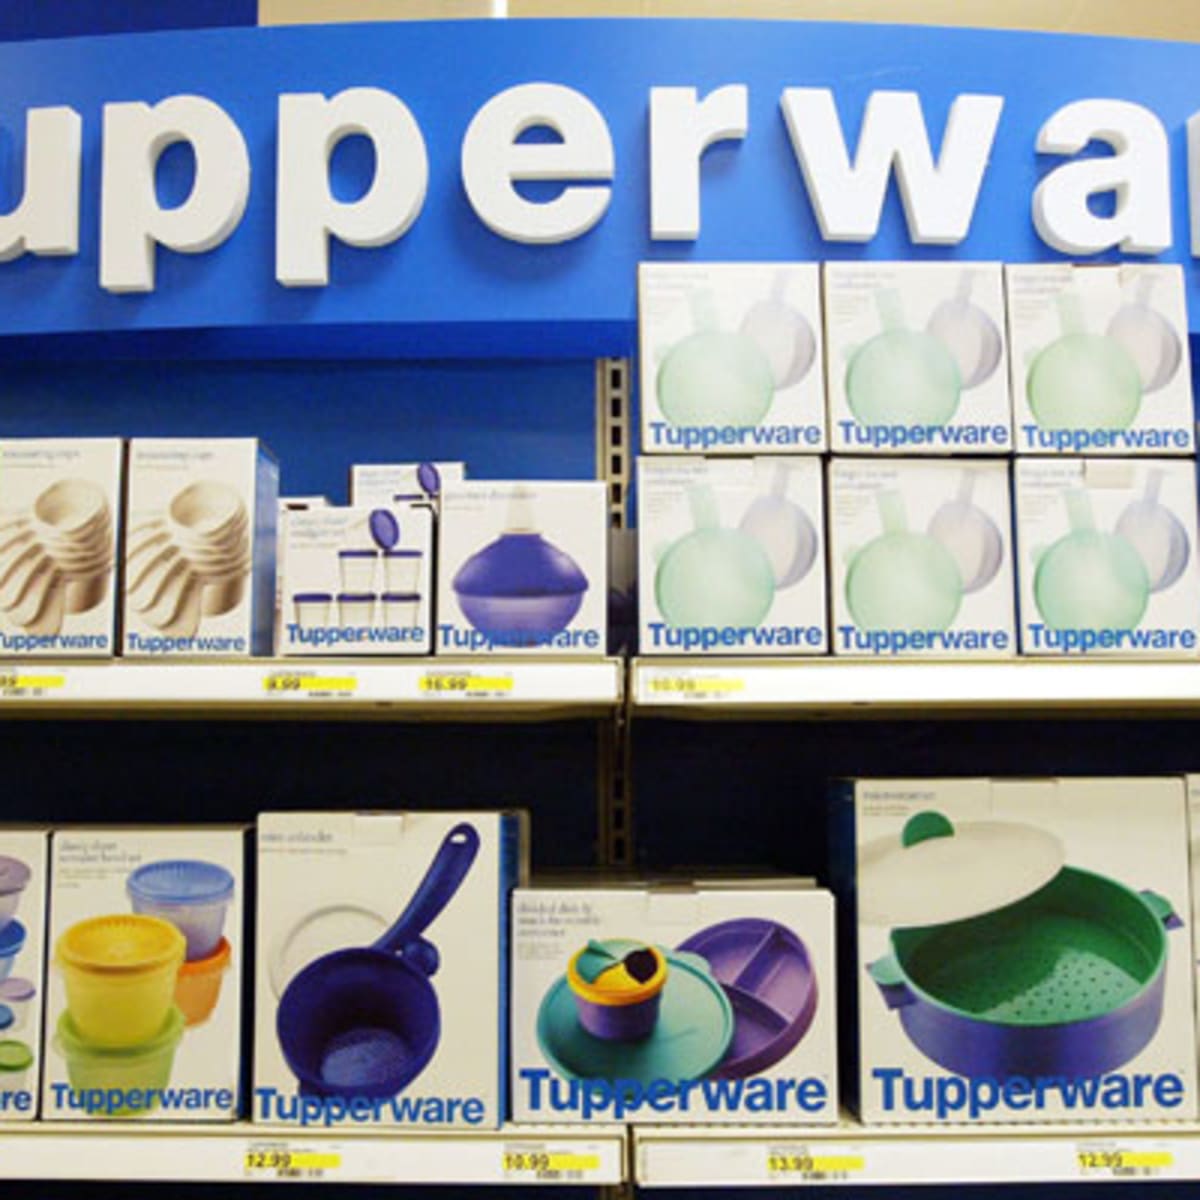 Tupperware Brands Names New CEO as Business Looks for Traction - WSJ